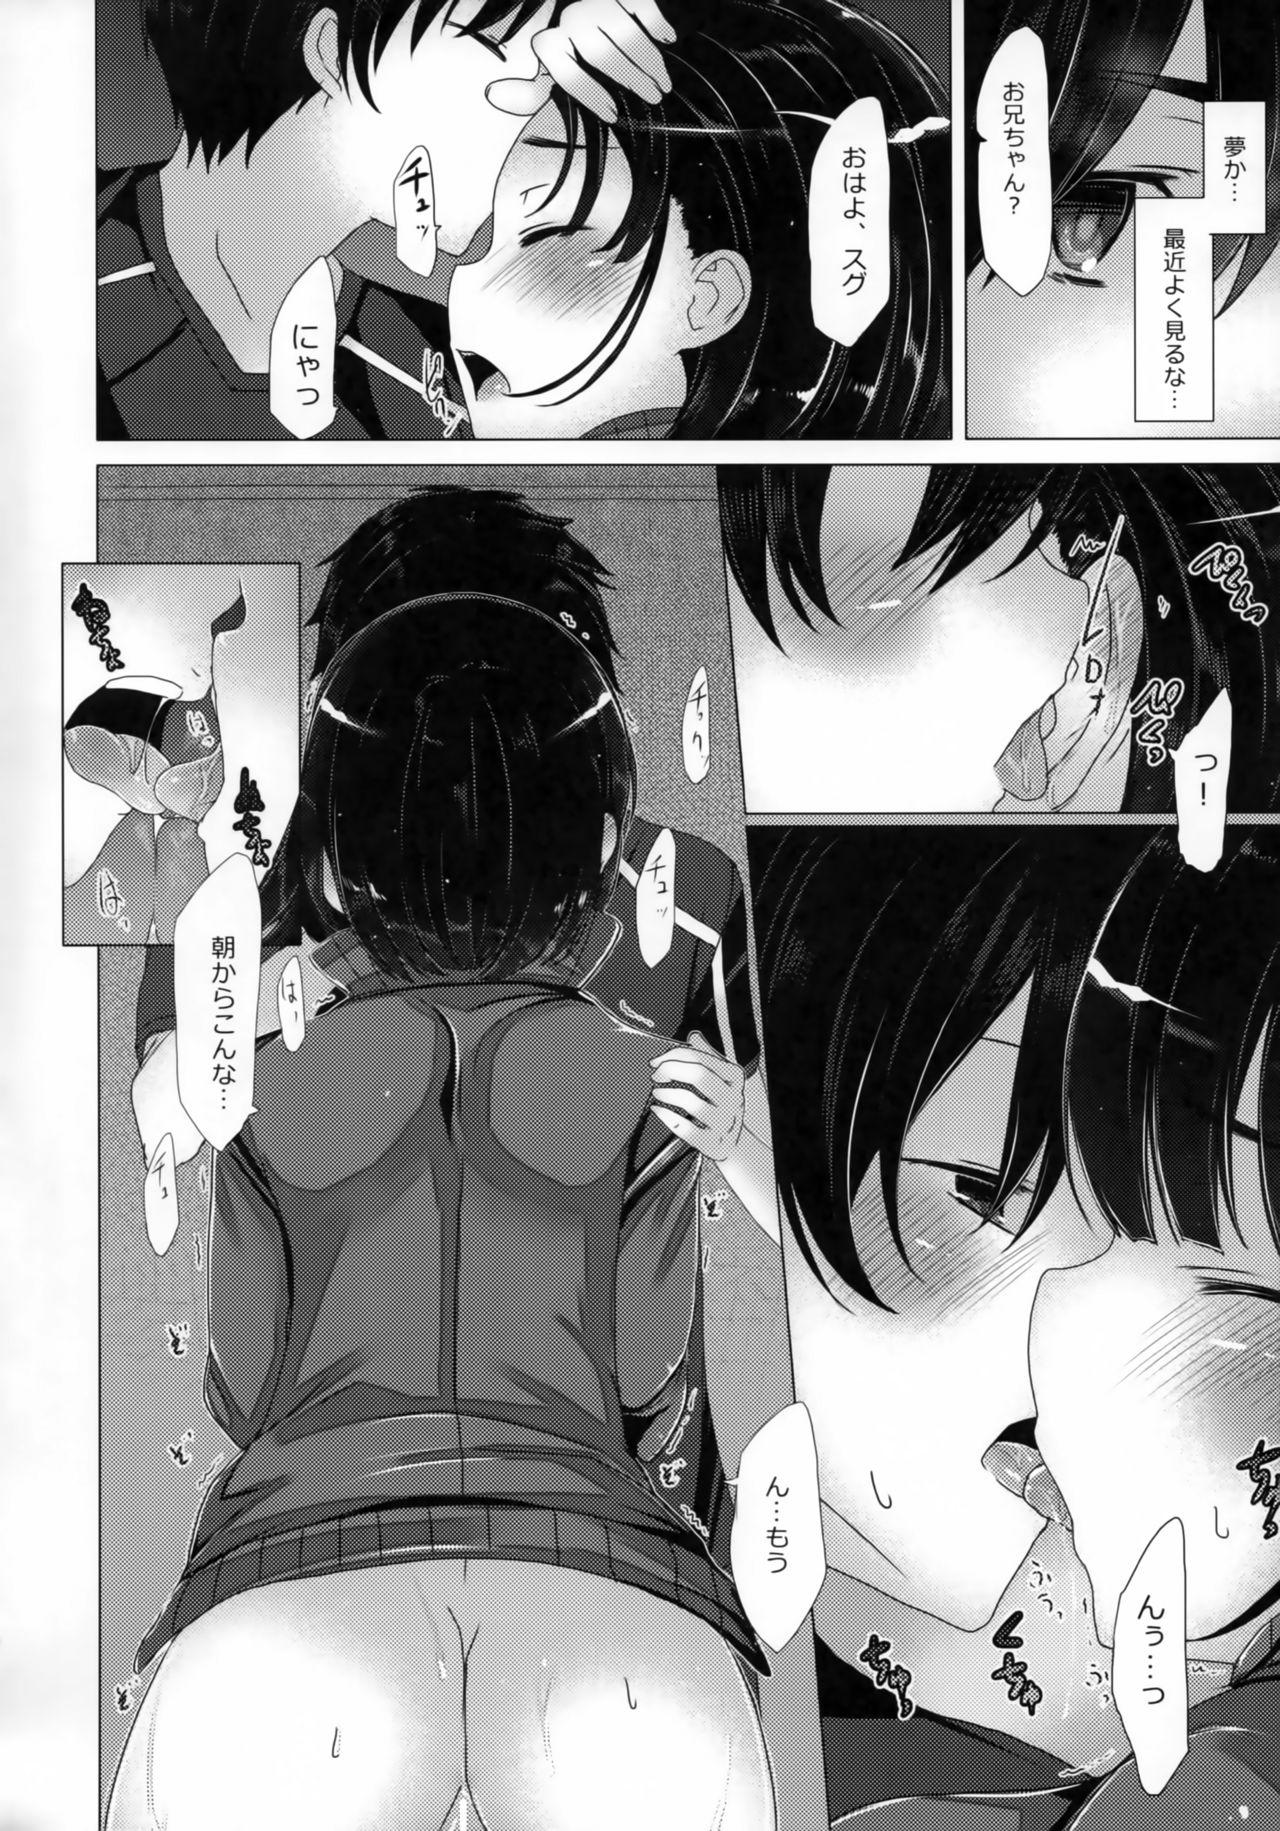 Wrestling Reach out Your hands - Sword art online Foda - Page 5